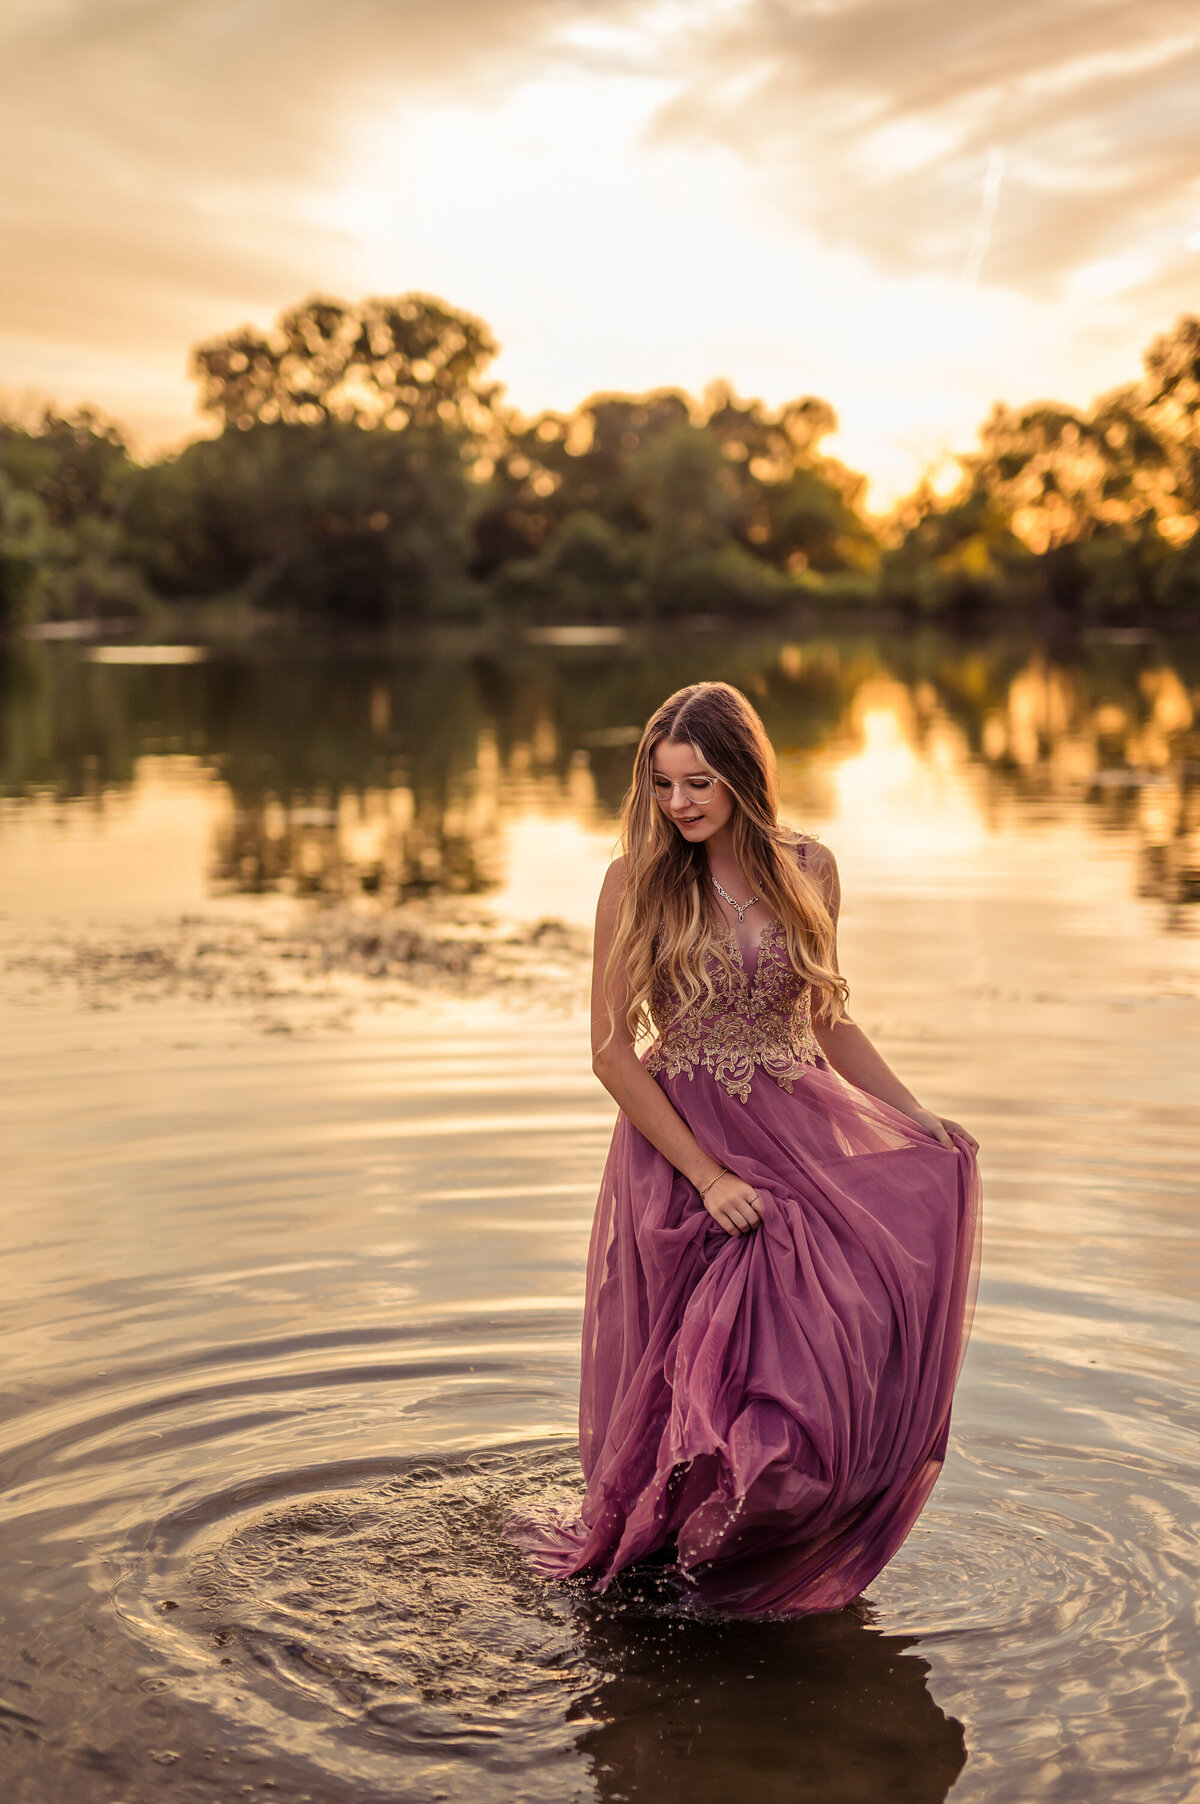 A girl from New Berlin West High School get her senior photos taken while stands in a Pewaukee lake wearing a pink and gold gown as water ripples around her.